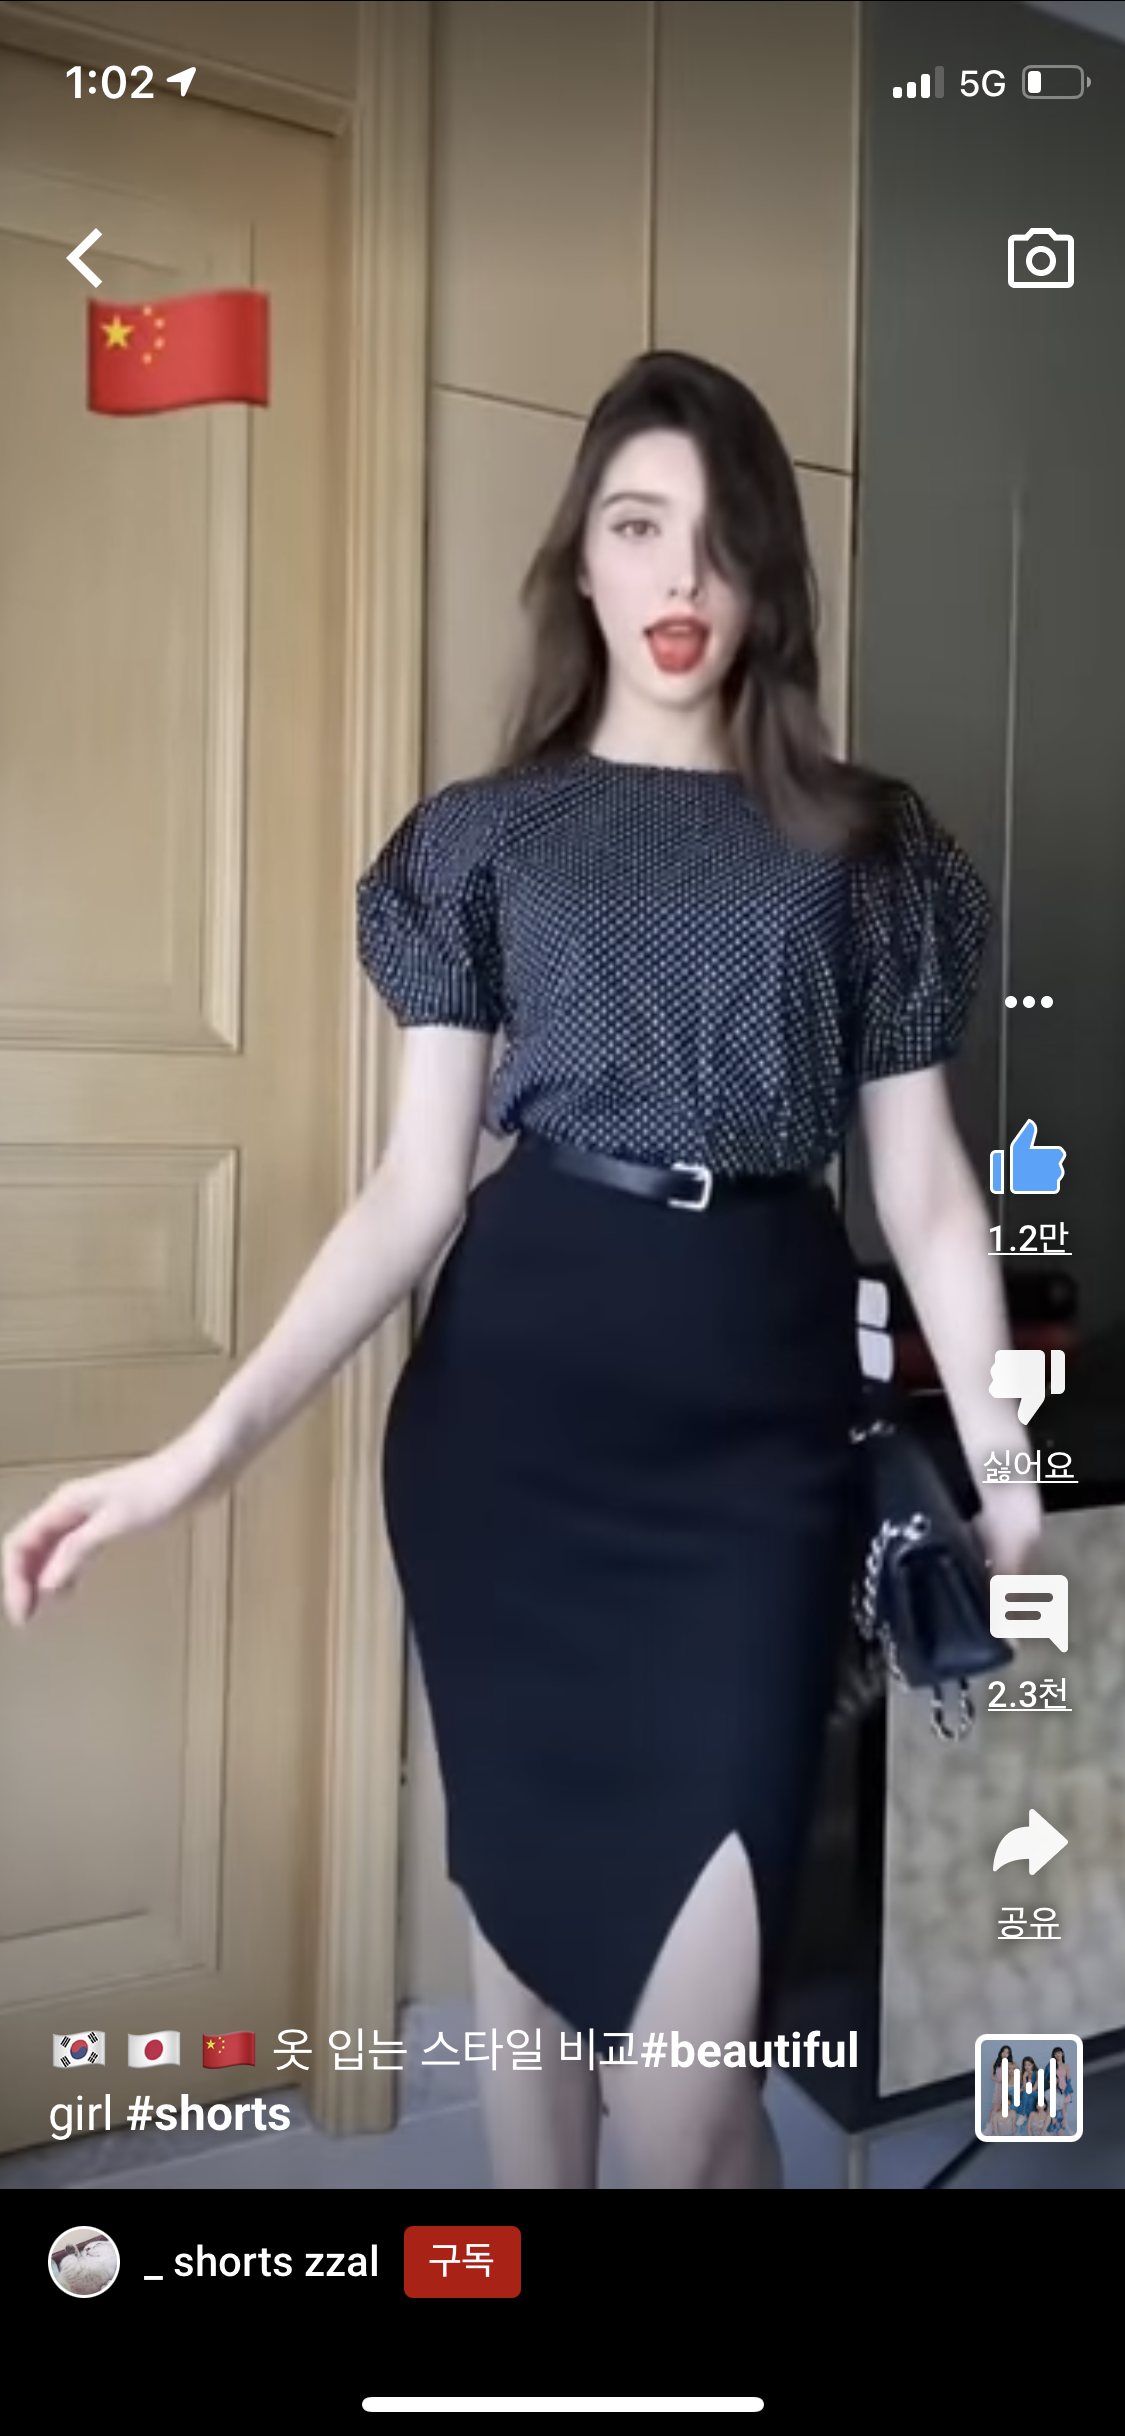 Comment on the video comparing styles of women's clothing between Korea, China and Japan